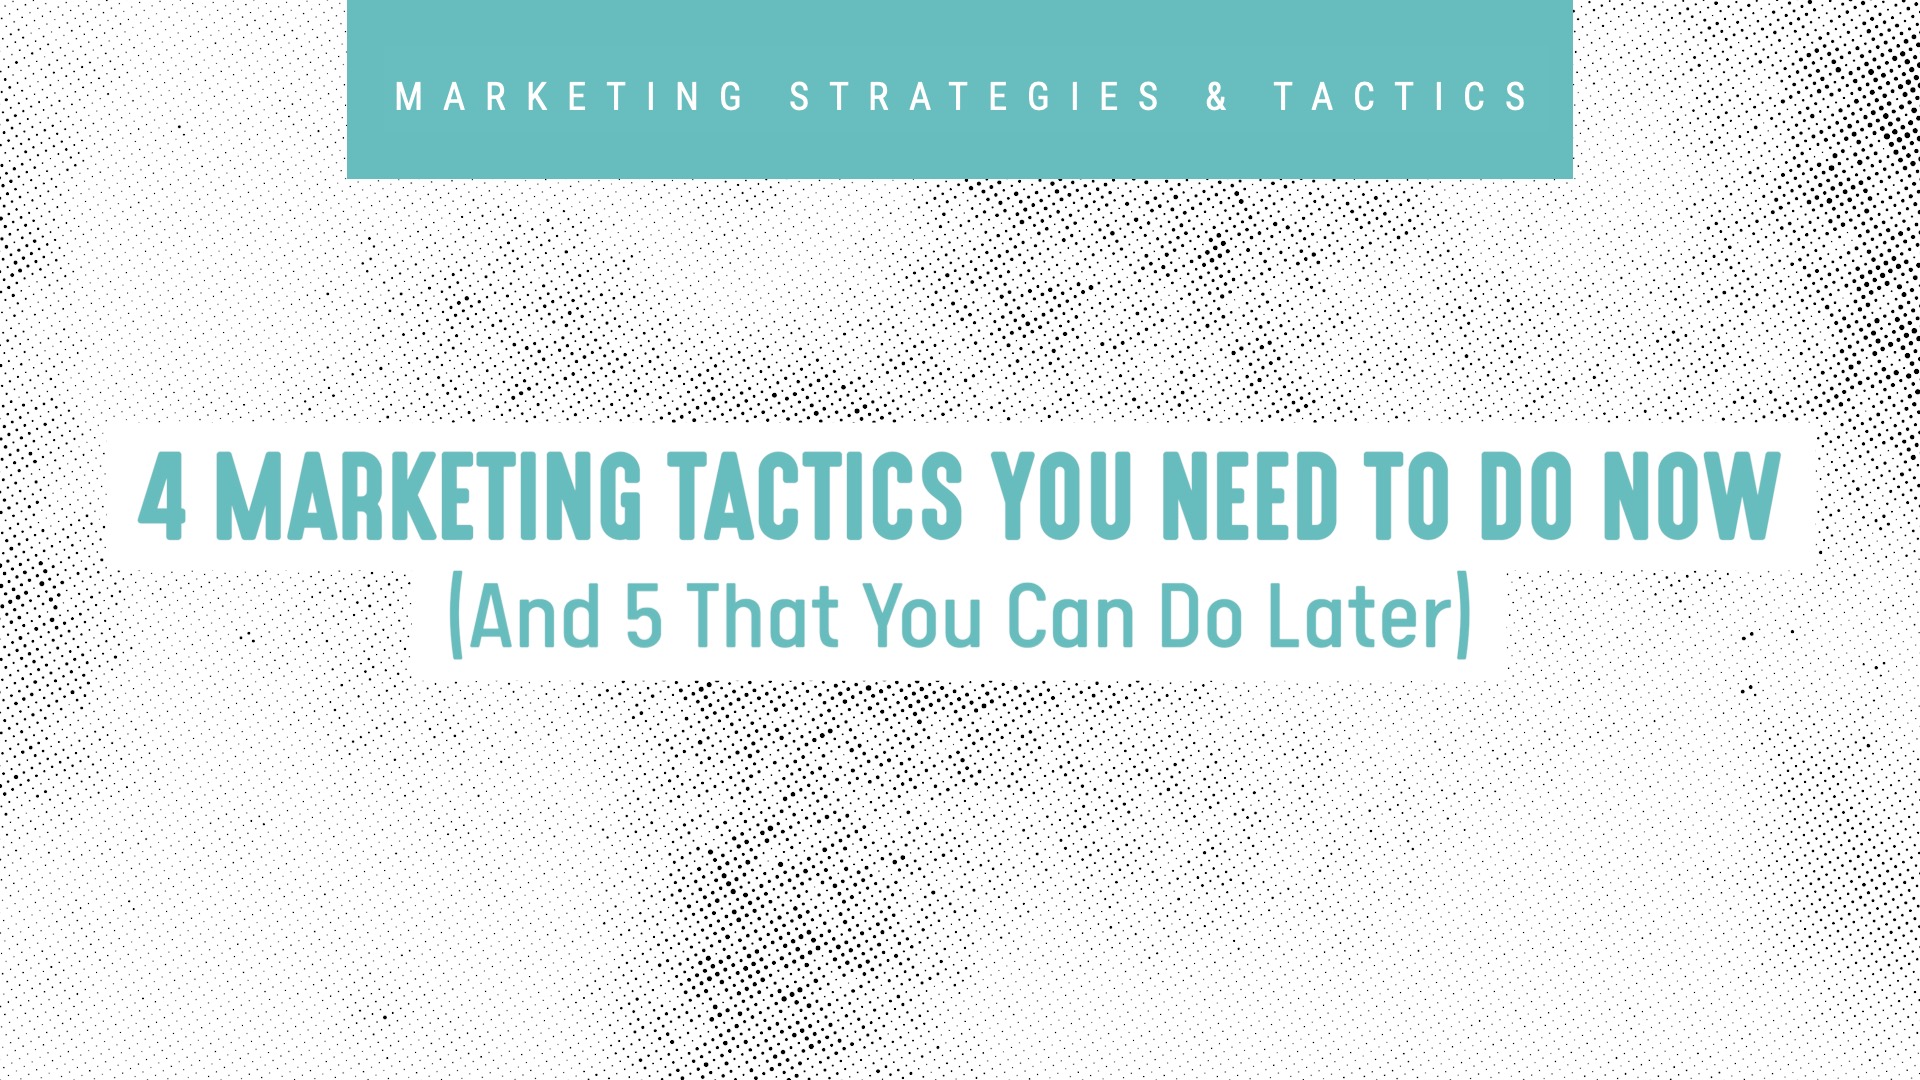 How to Prioritize Your Marketing Plans